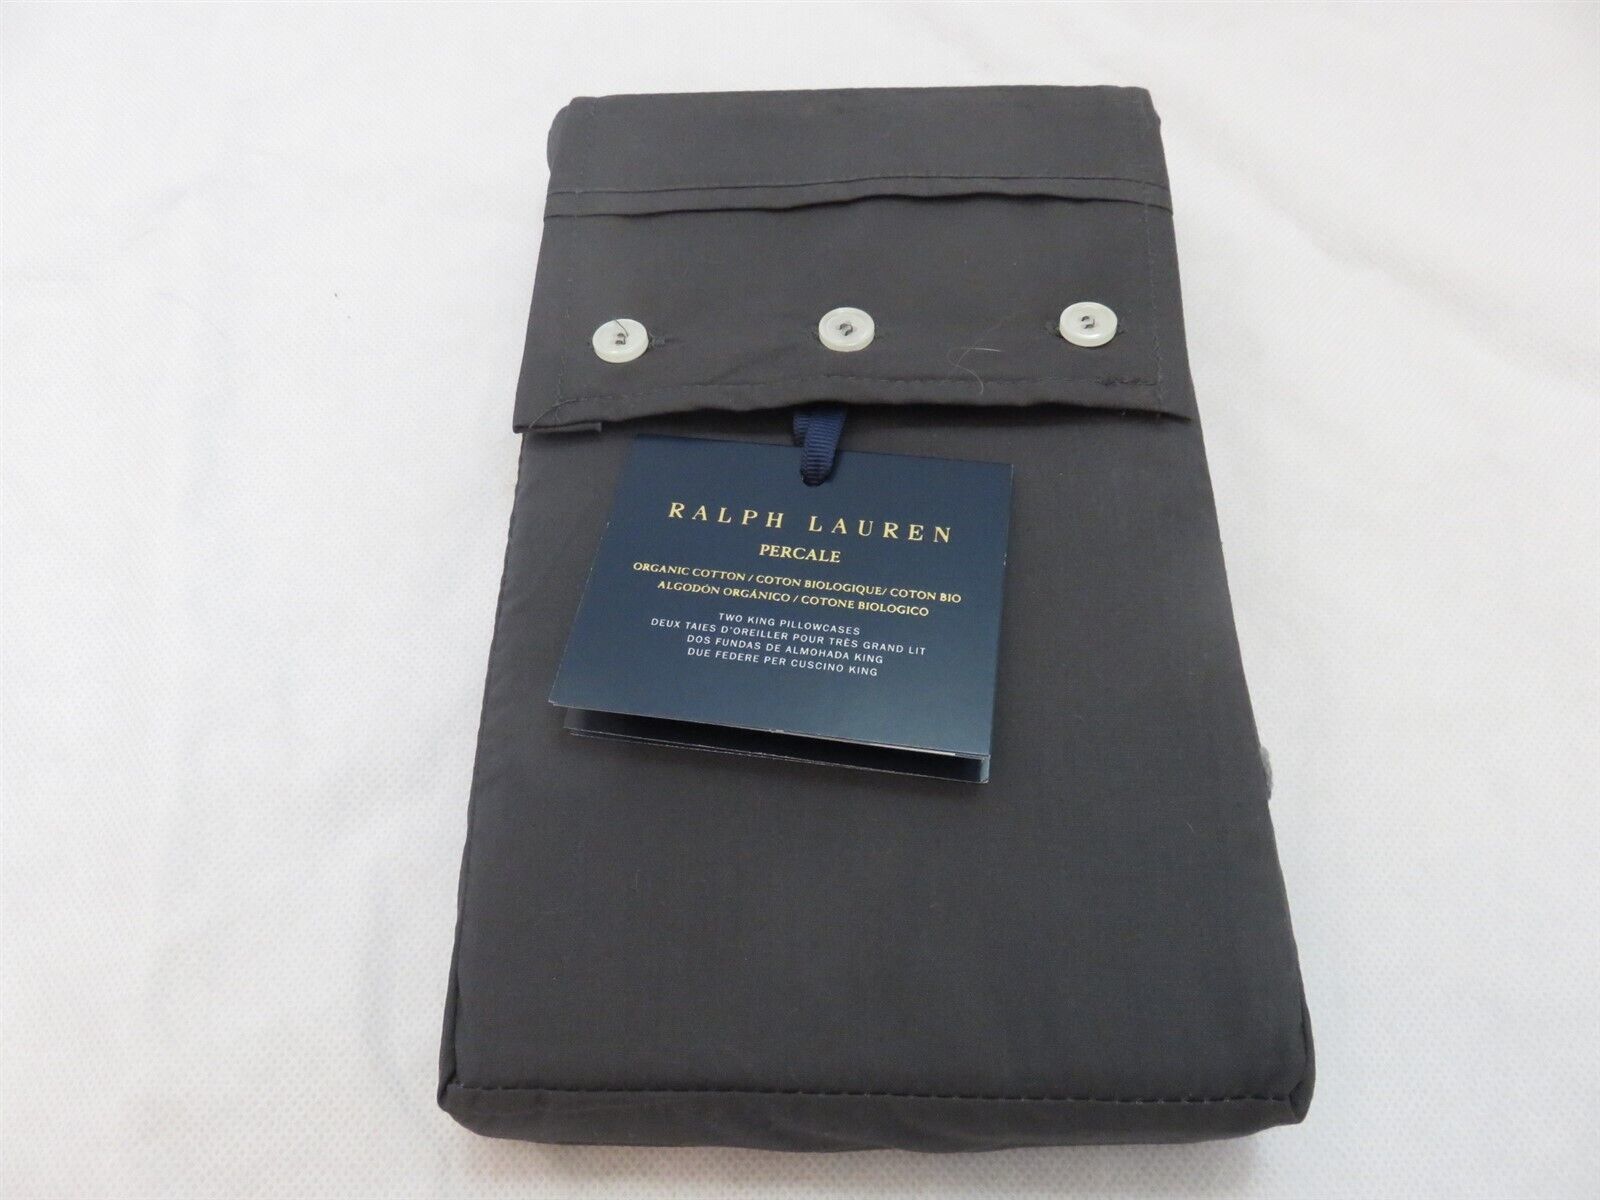 Primary image for Ralph Lauren Organic Cotton Percale 464TC King pillowcases loft gray $150